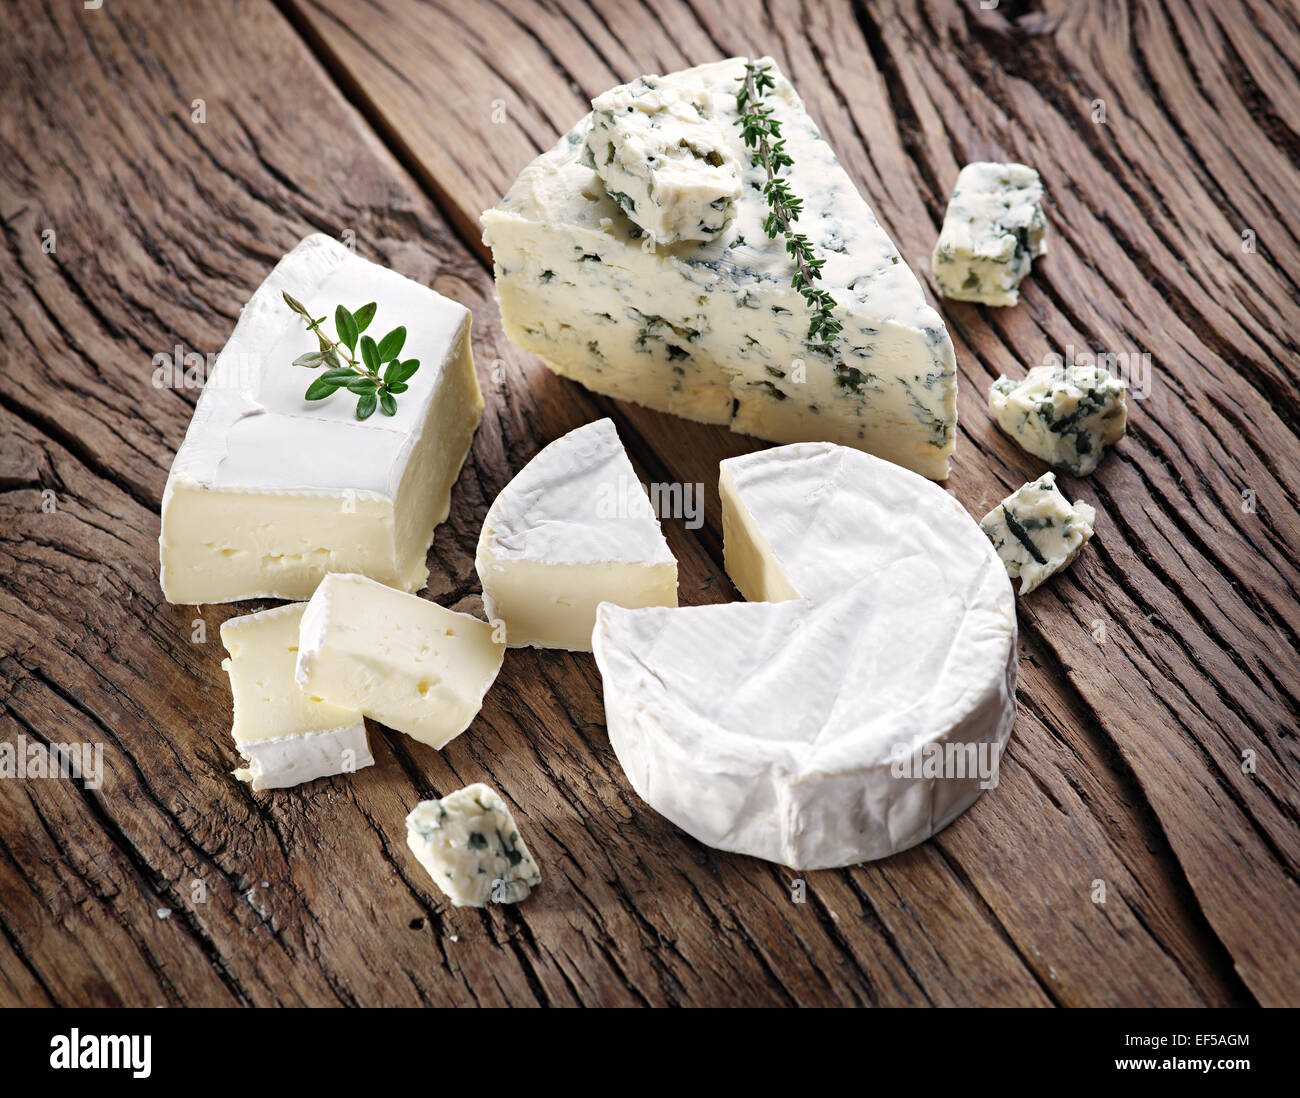 Group of cheese with mold on old wooden table. Stock Photo